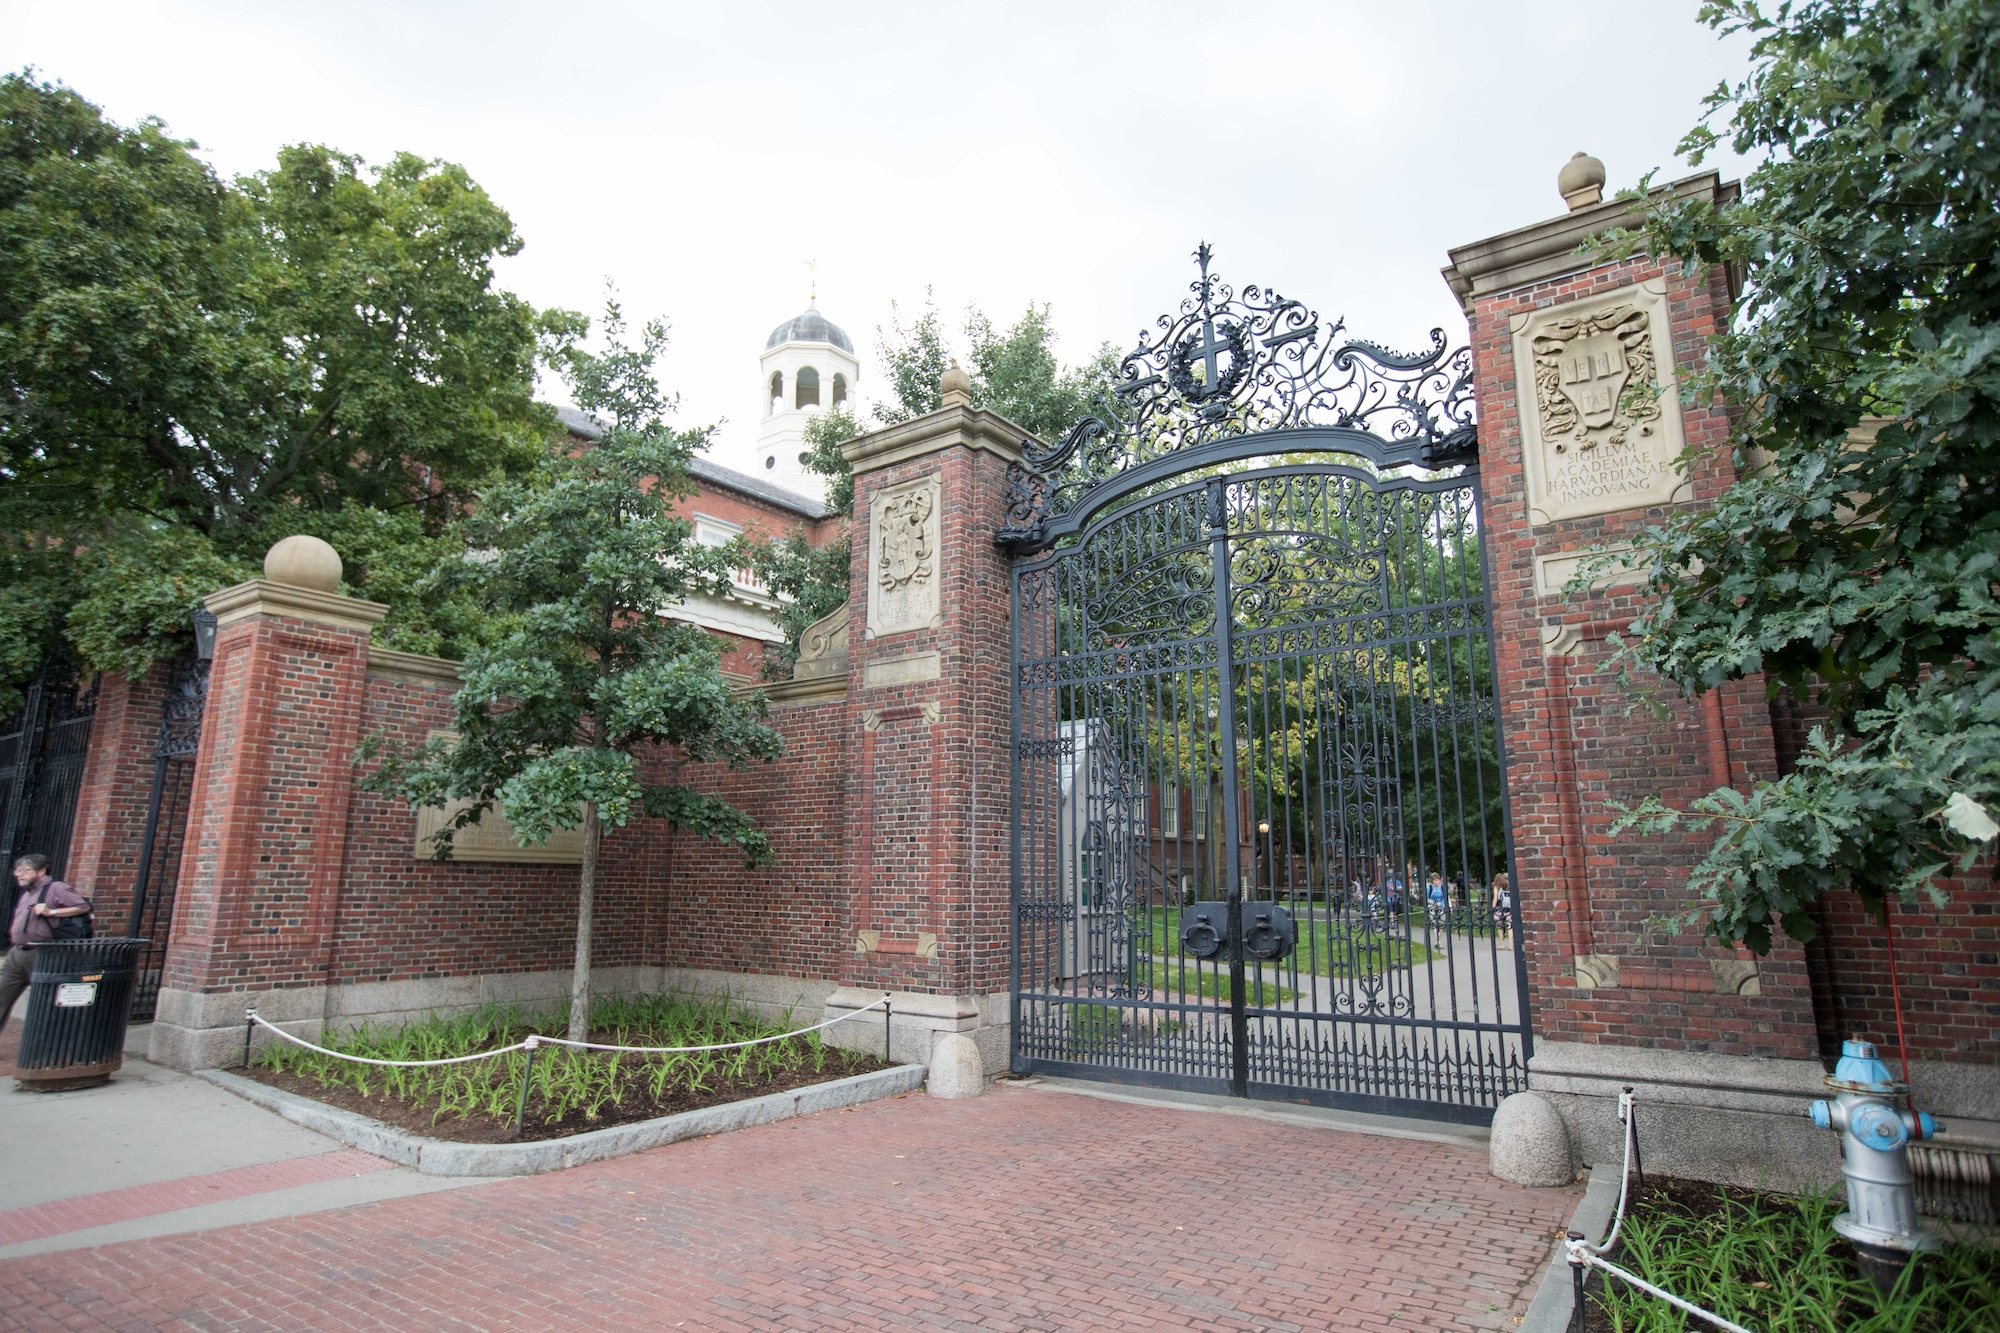 CAMBRIDGE, MA - AUGUST 30: A gate in front of Harvard Yard at Harvard University on August 30, 2018 (Photo by Scott Eisen/Getty Images)